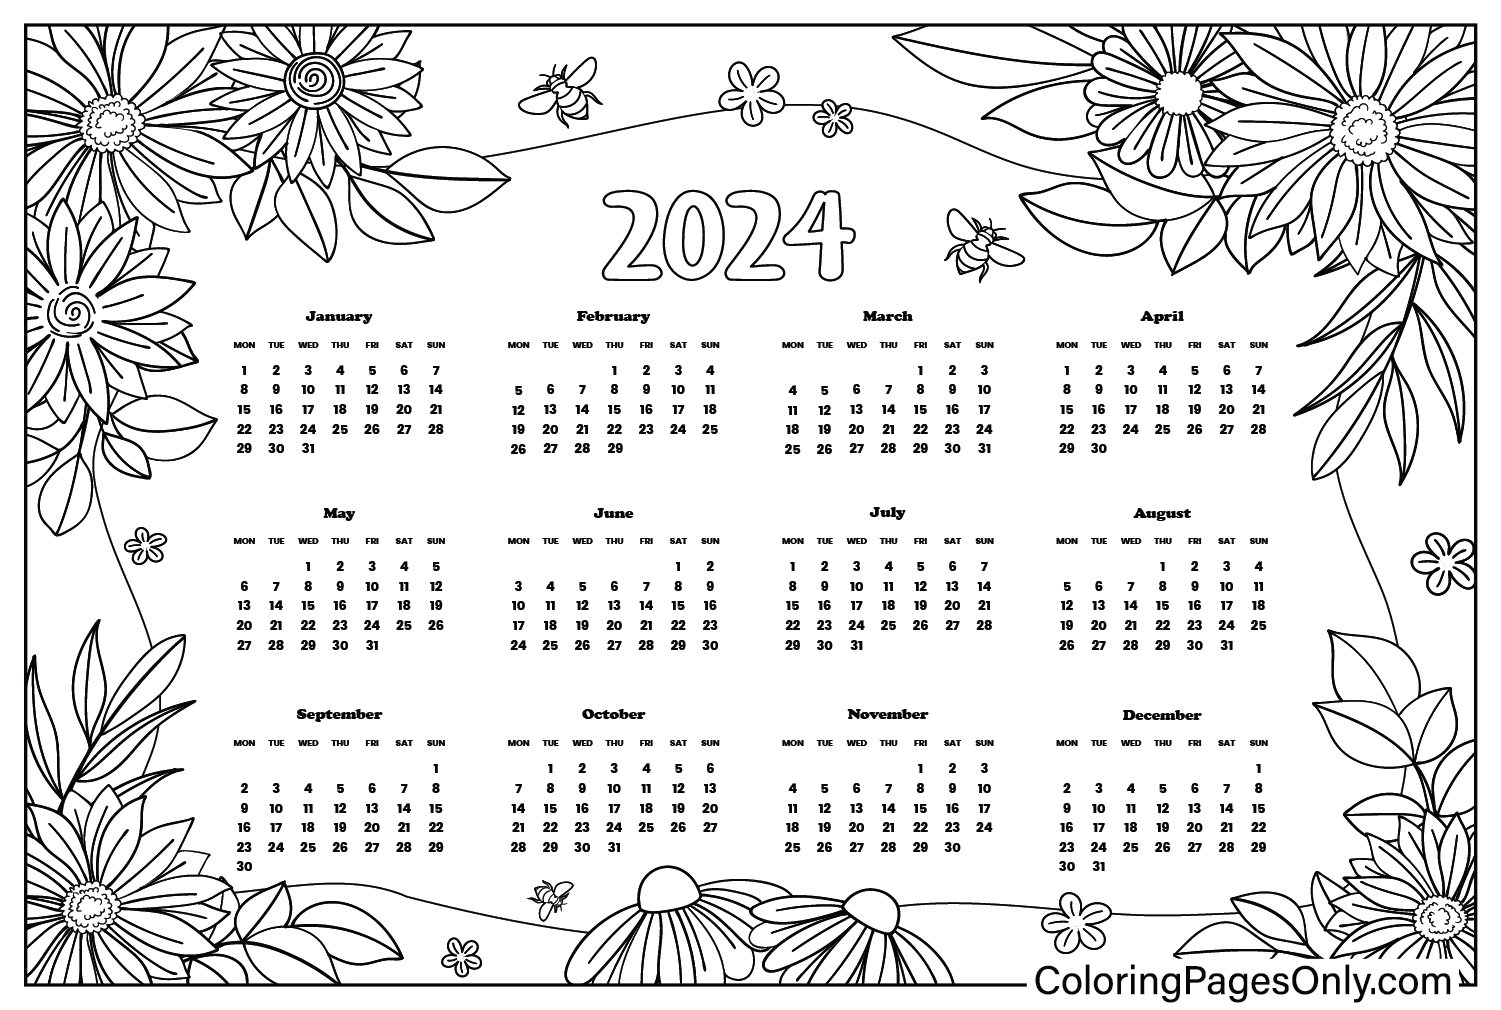 Calendar 2024 Coloring Pages to Printable Free Printable Coloring Pages